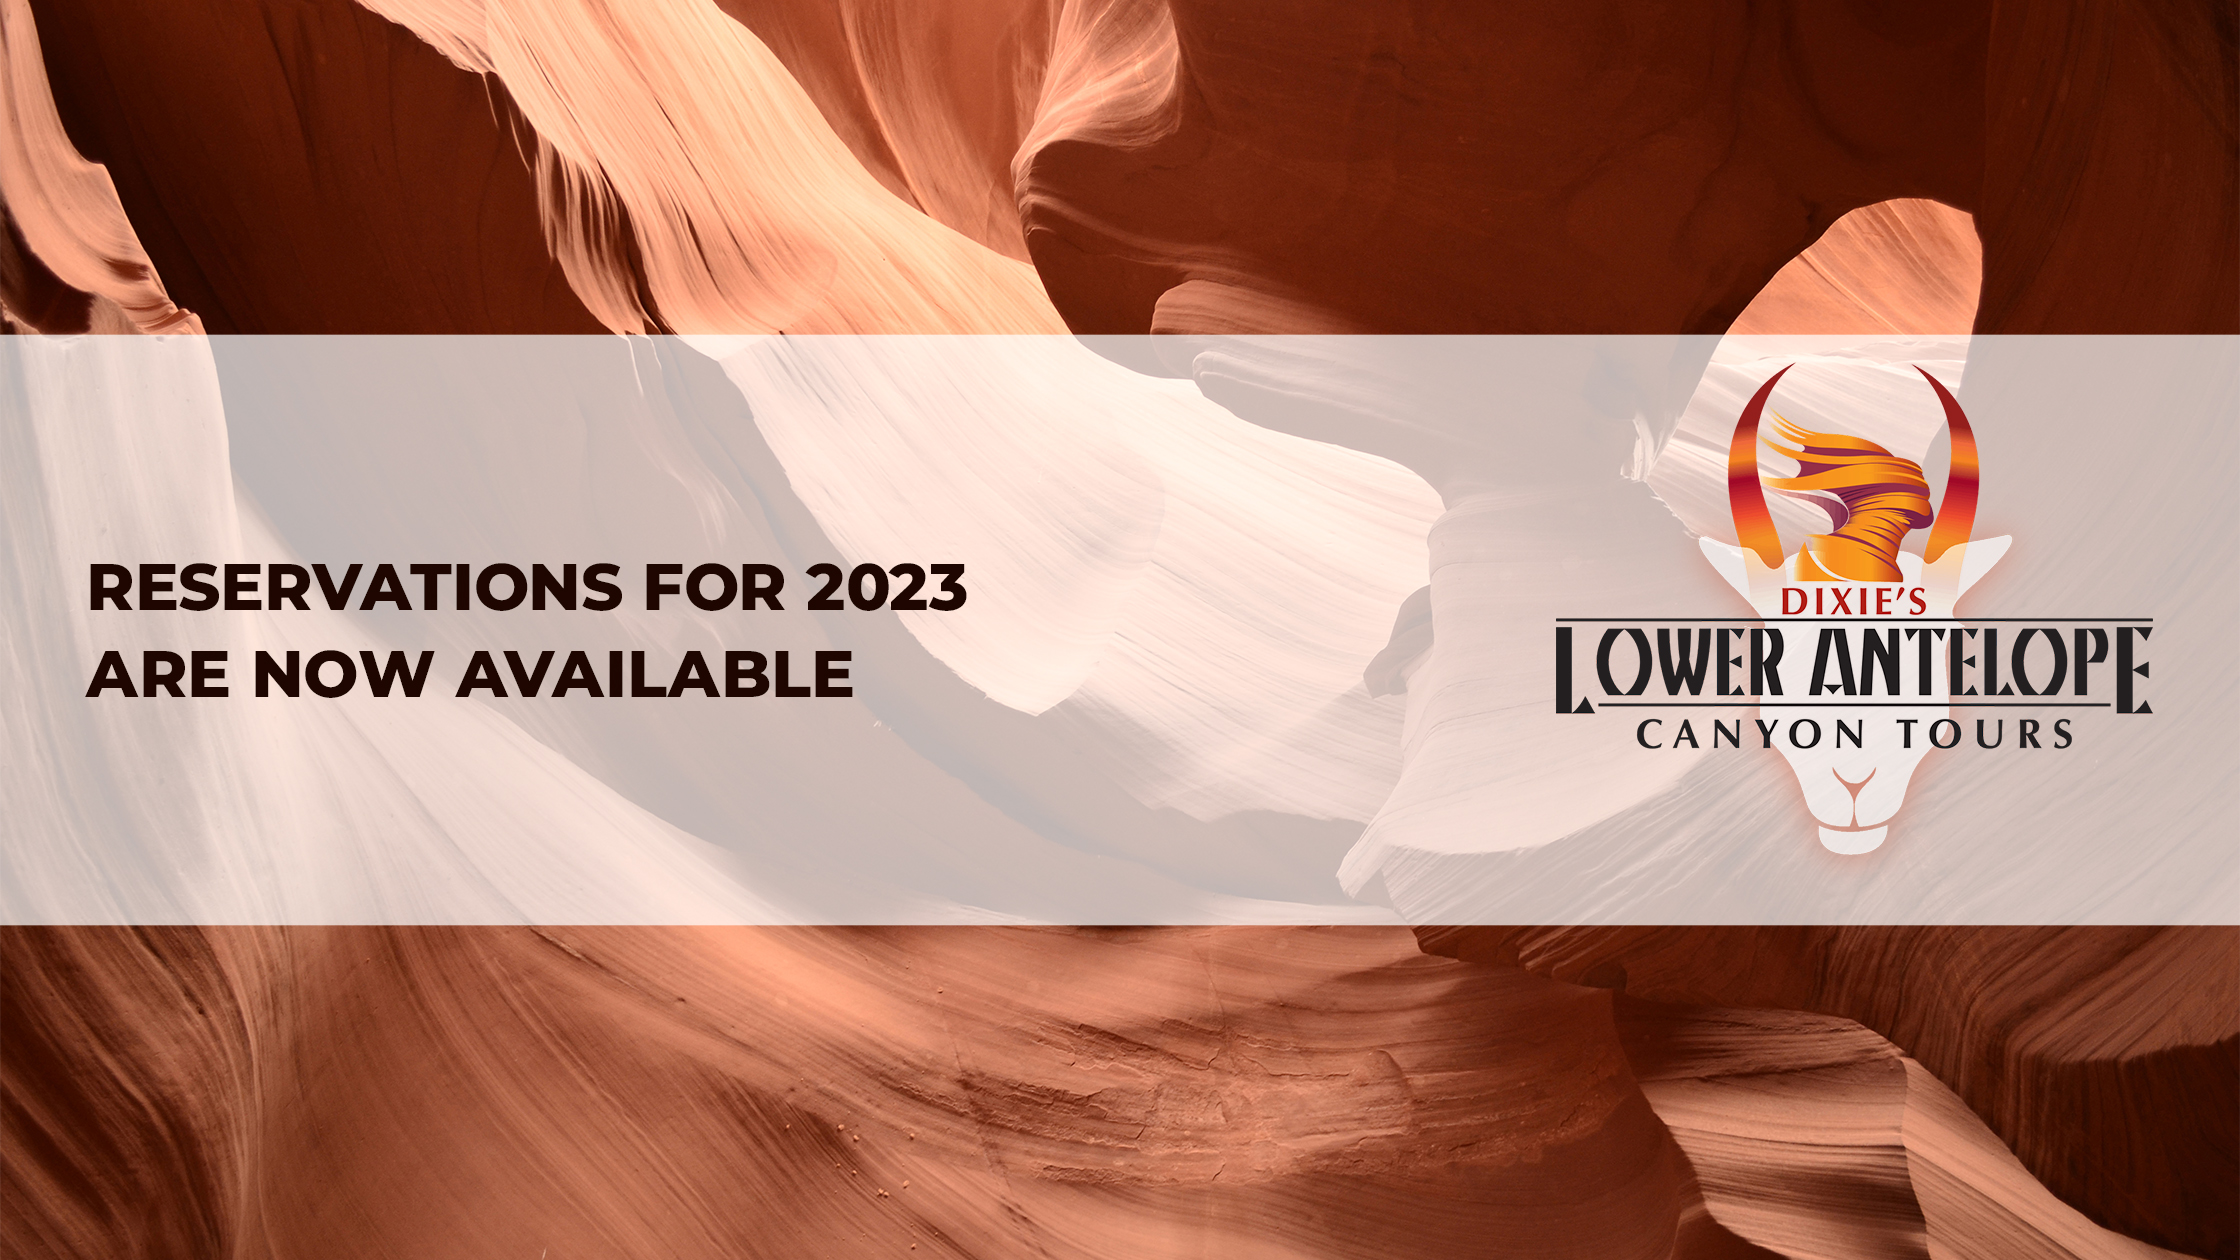 Reservations for 2023 are now available Dixie's Antelope Canyon Tours